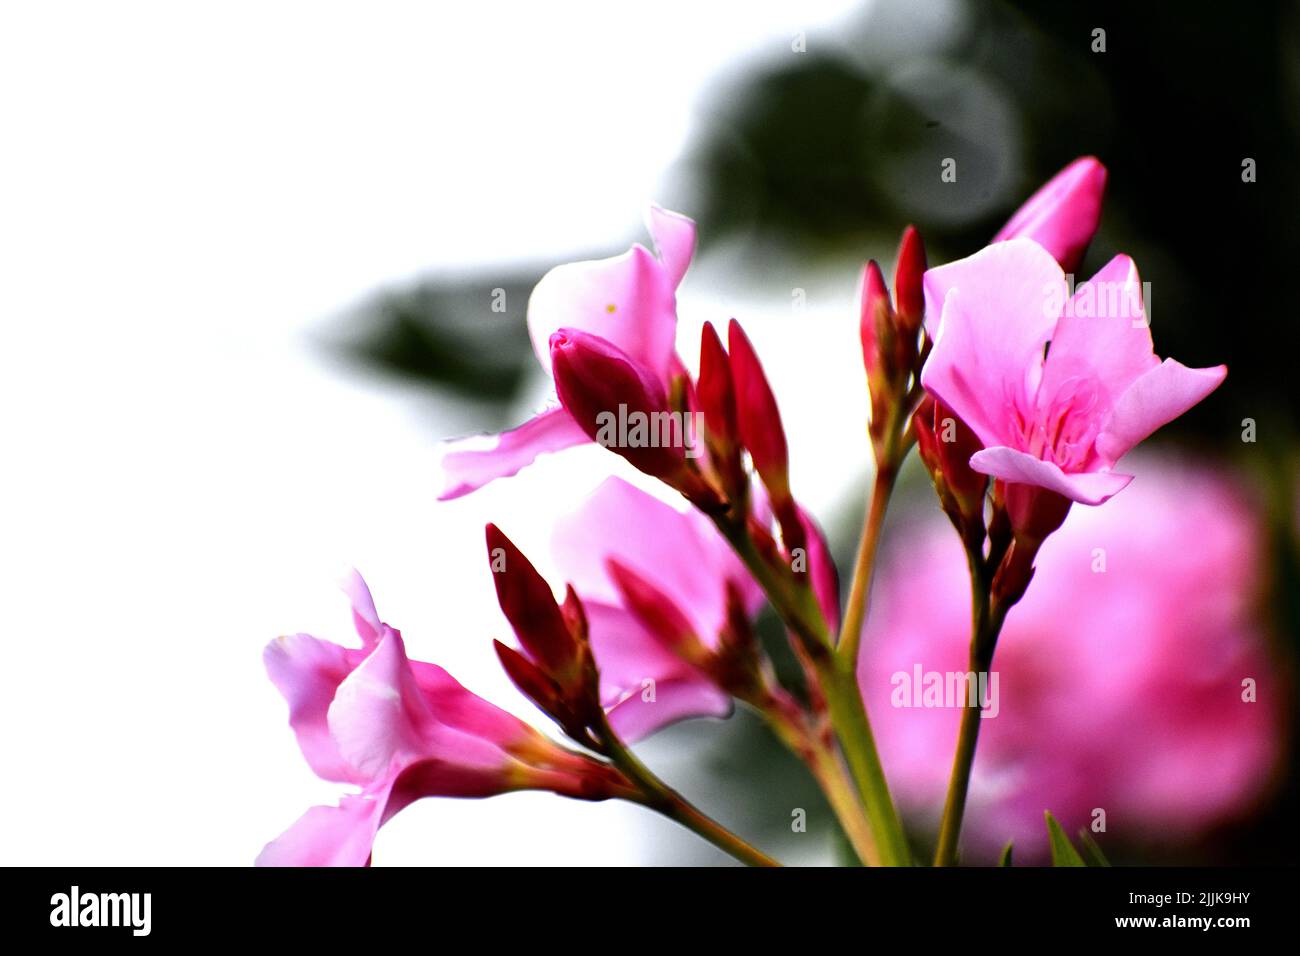 A closeup of beautiful pink flowers against the blurry background Stock Photo